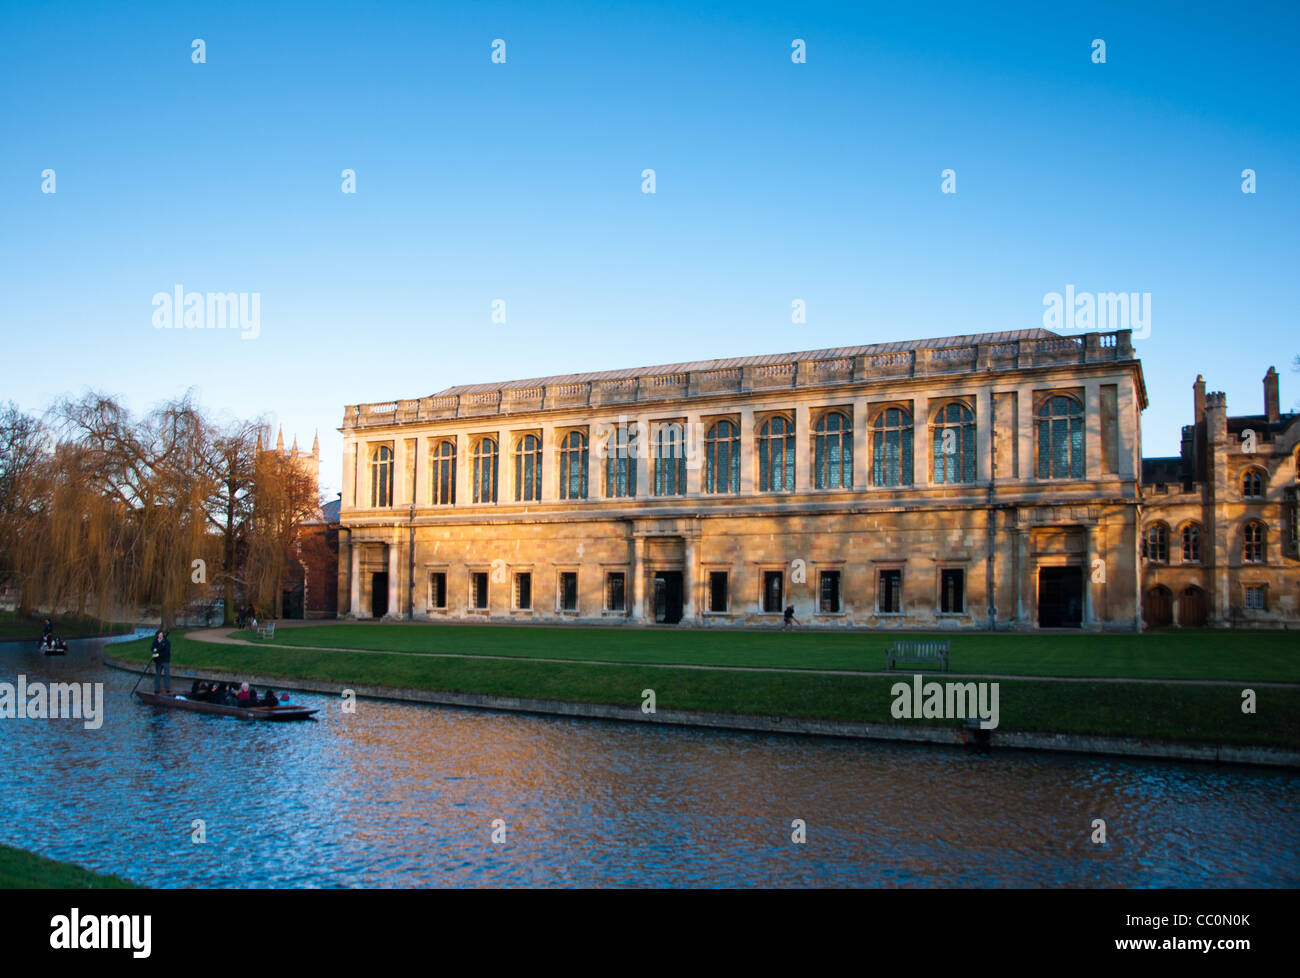 The Wren Library at sunset, Trinity College Cambridge, with punting in front on the river Cam, UK Stock Photo